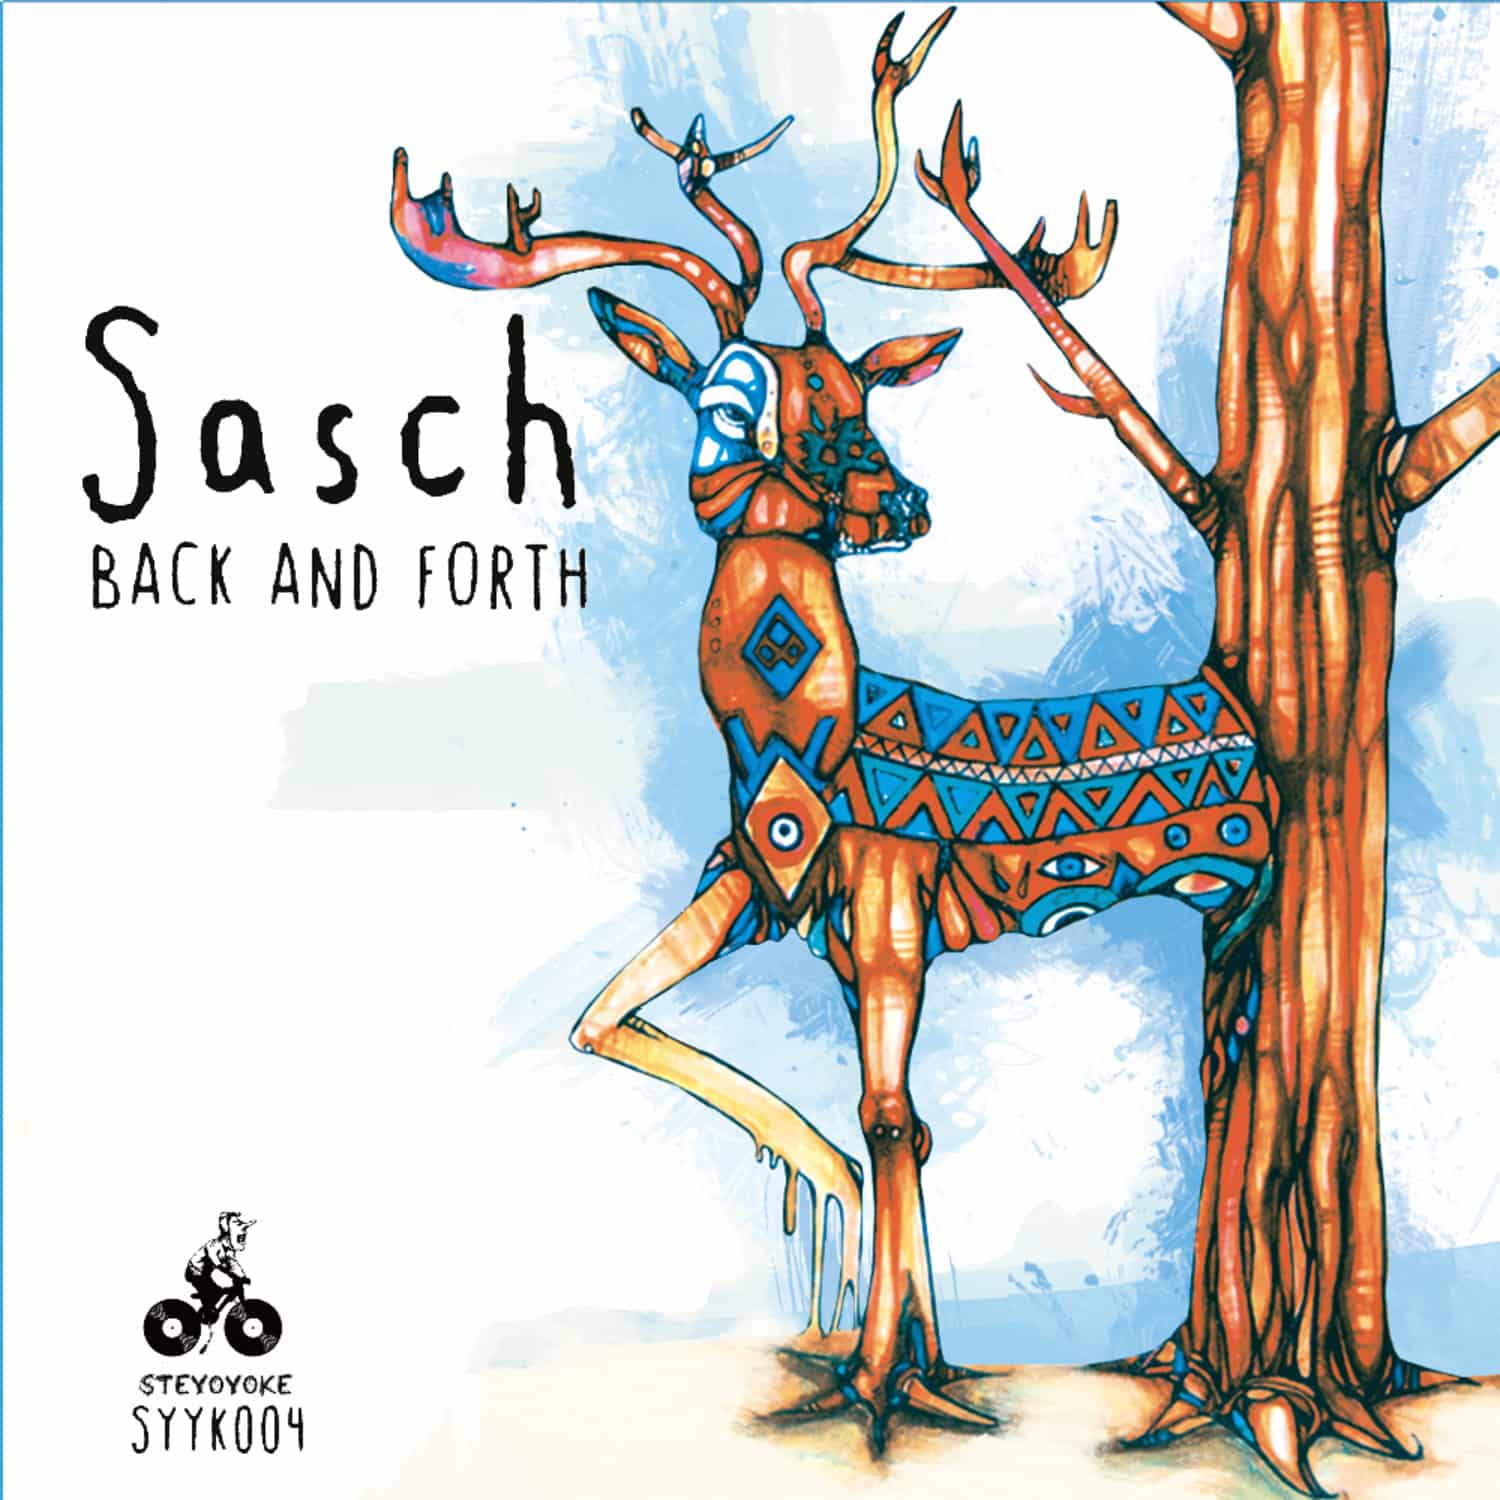 Sasch - BACK AND FORTH